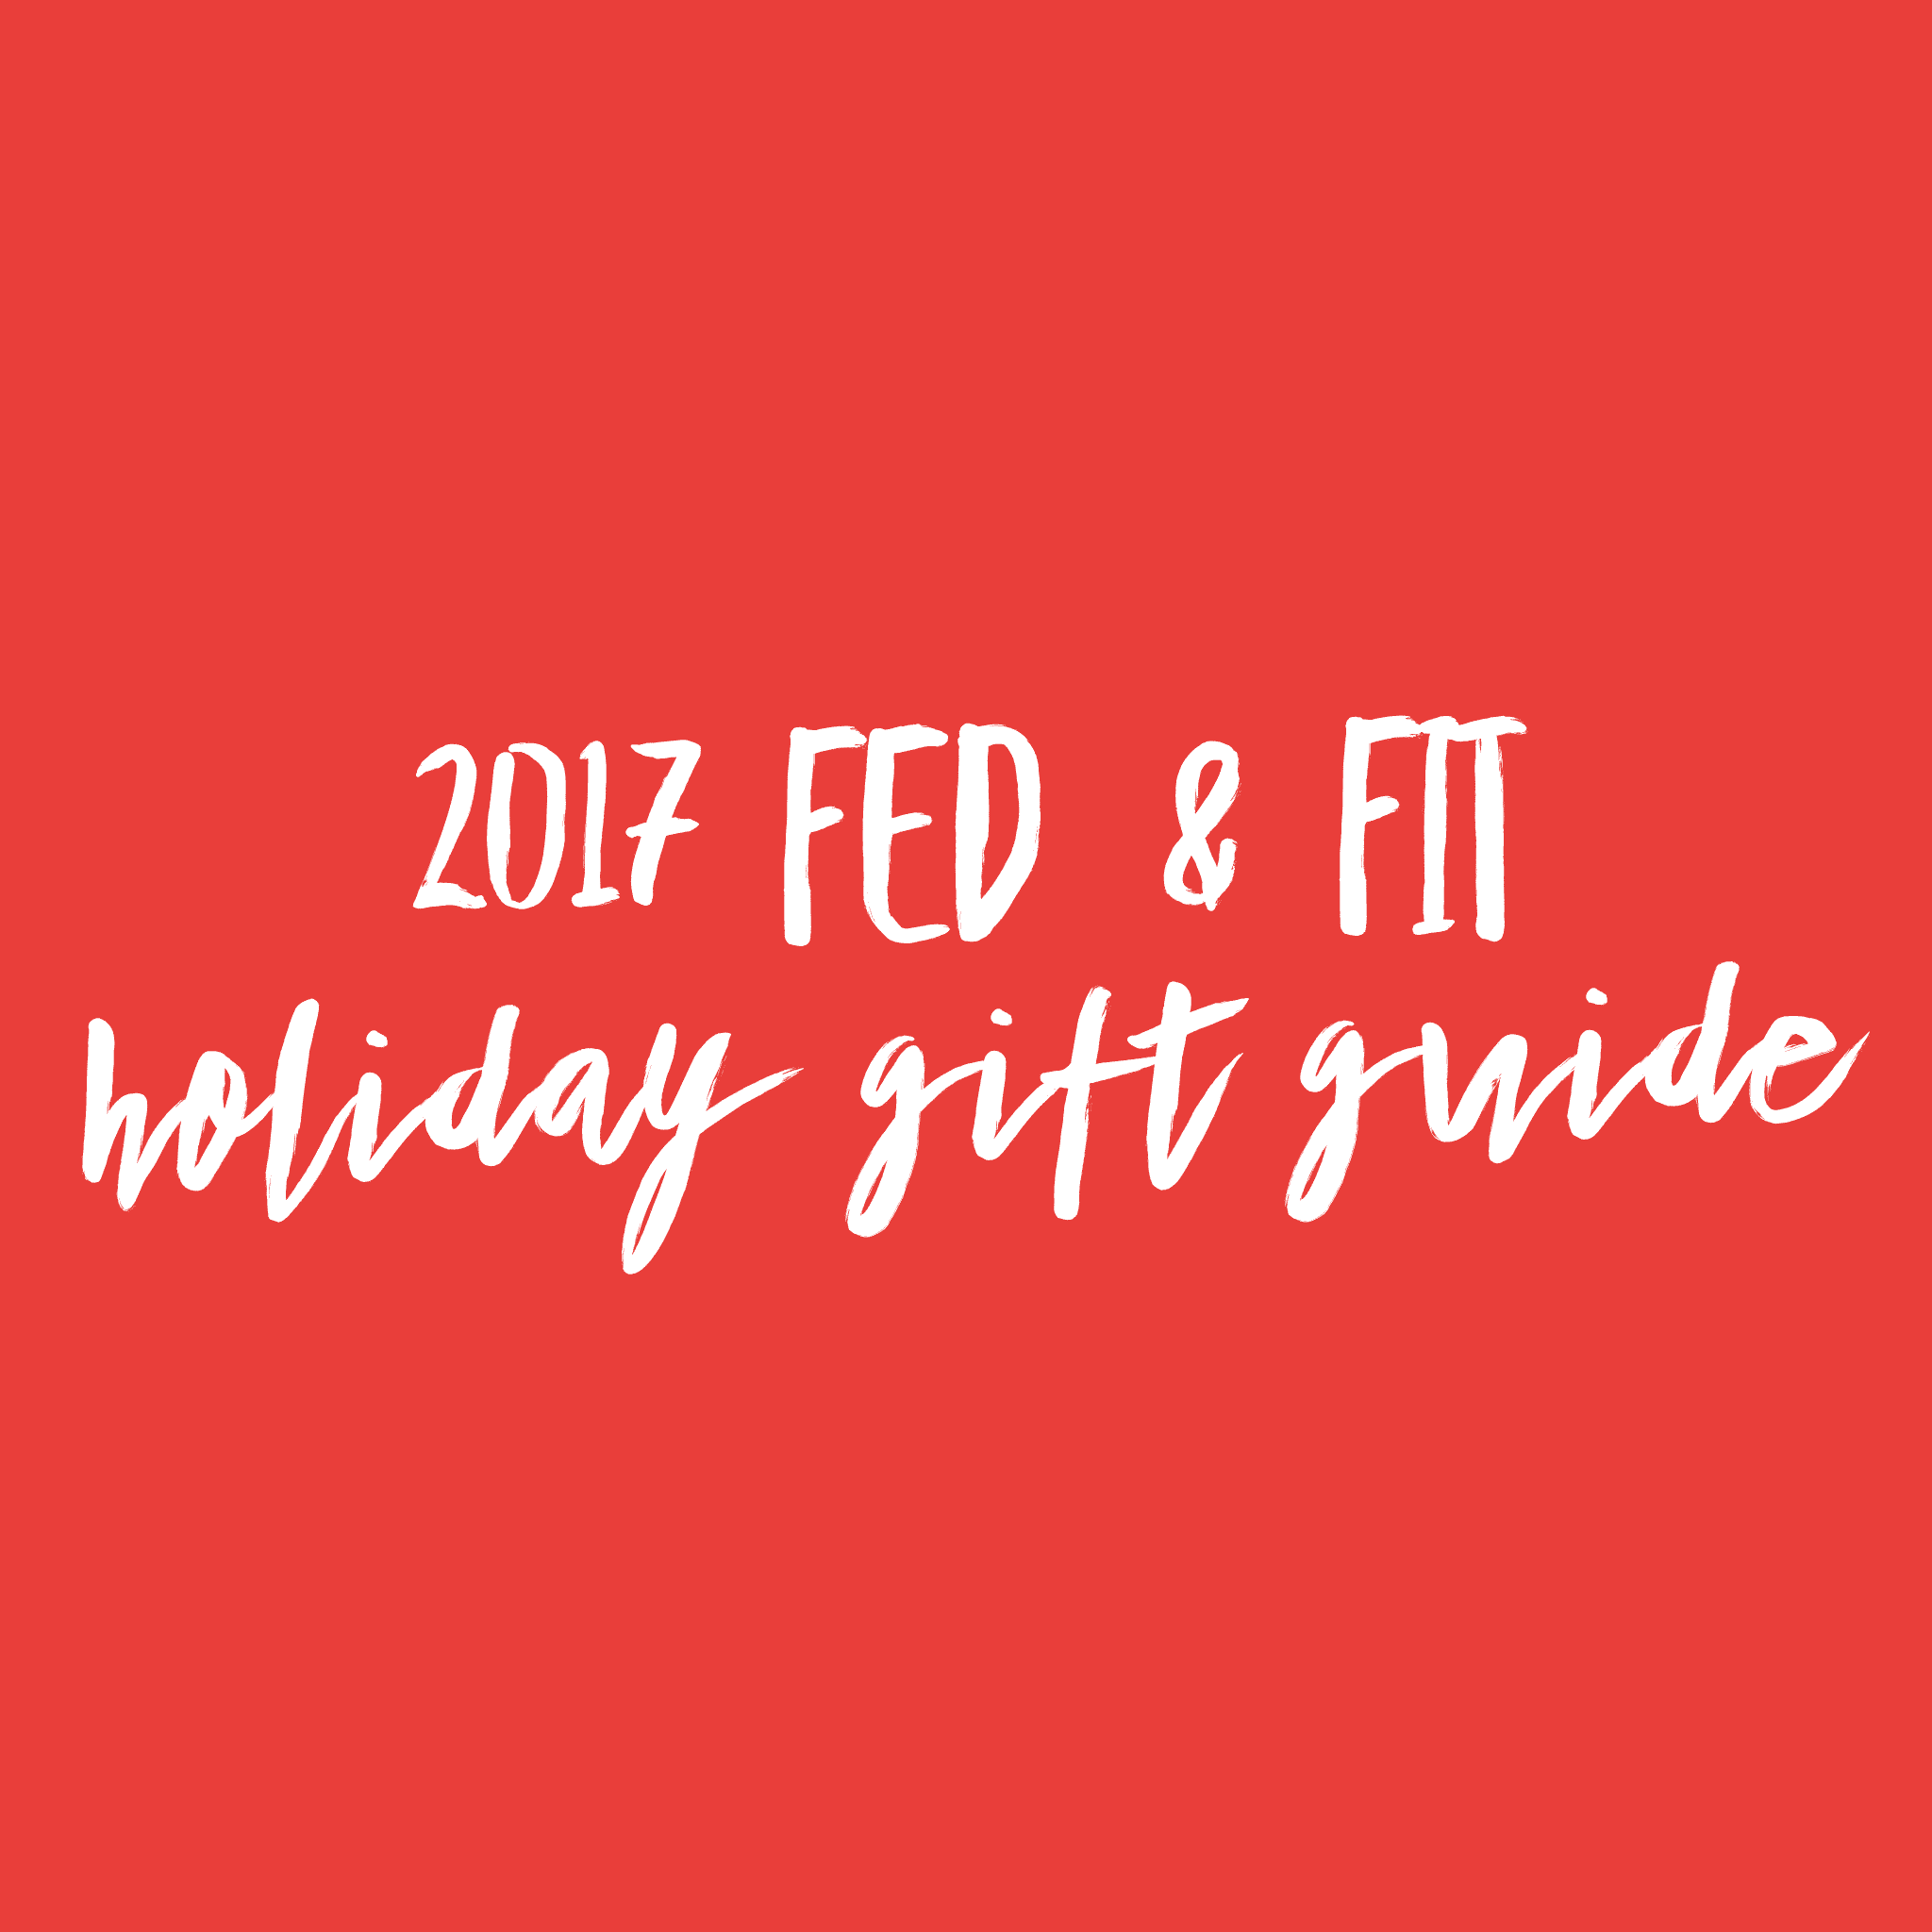 red square with white text 2017 Fed & Fit holiday gift guide